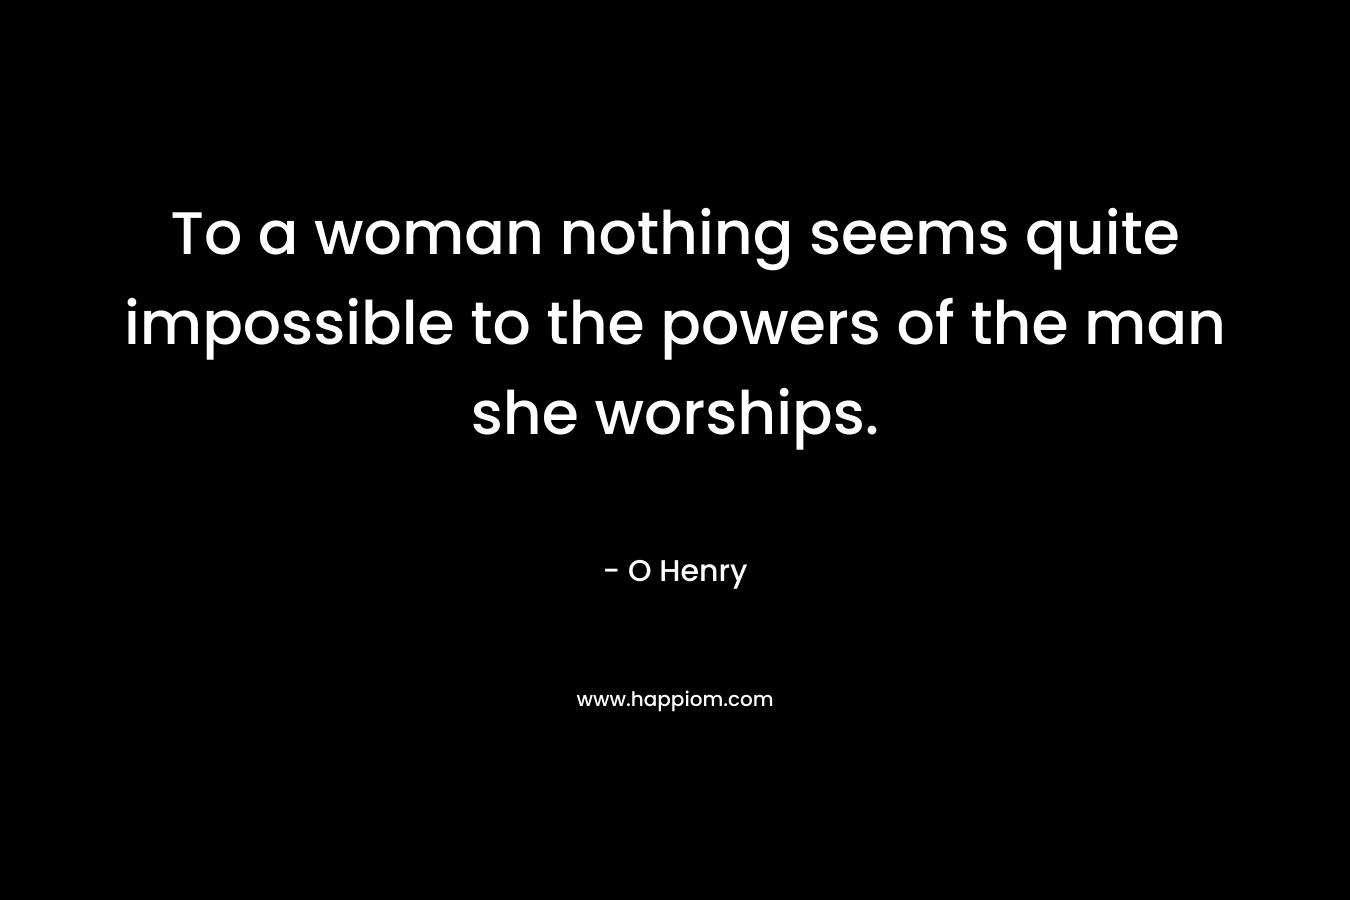 To a woman nothing seems quite impossible to the powers of the man she worships.